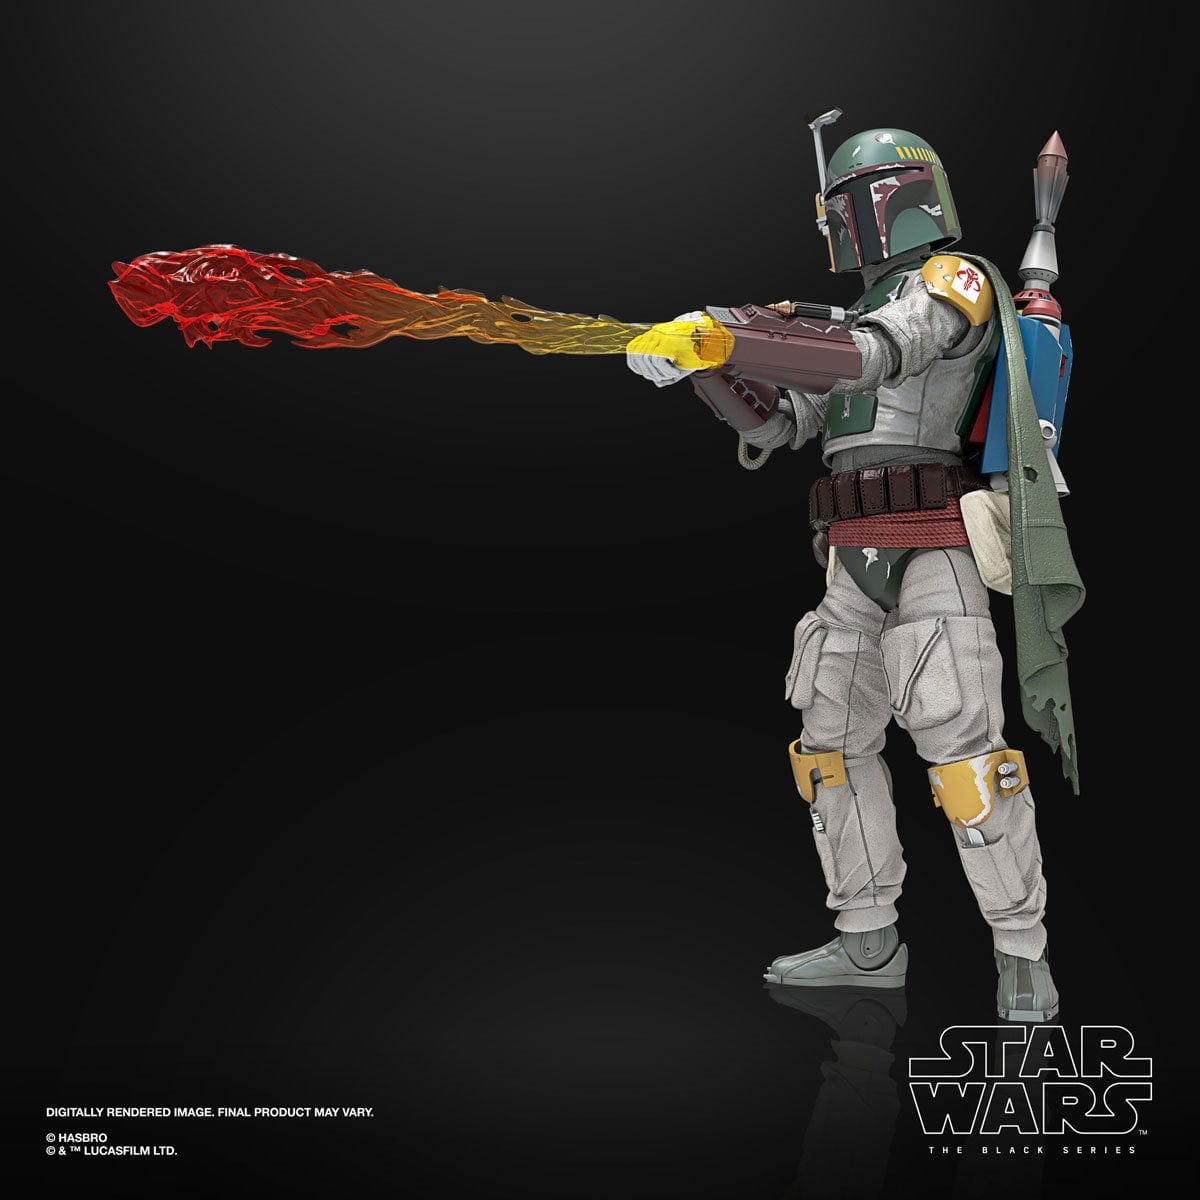 Star Wars The Black Series Boba Fett Deluxe 6-Inch Action Figure